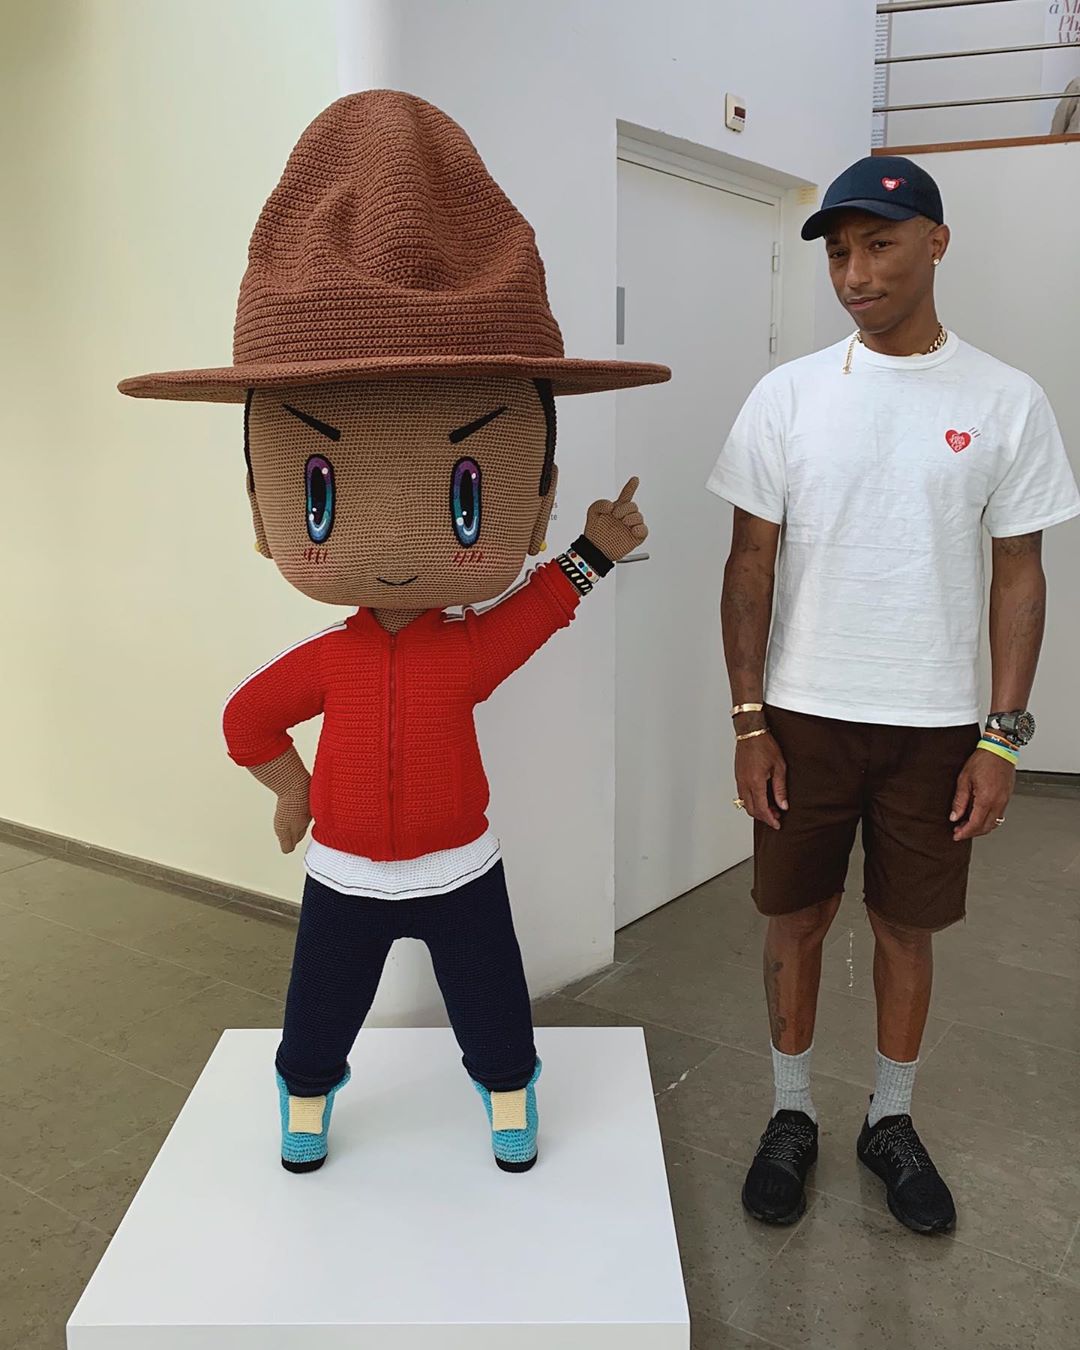 SPOTTED: Pharrell Williams at Galerie Perrotin in Human Made Ensemble